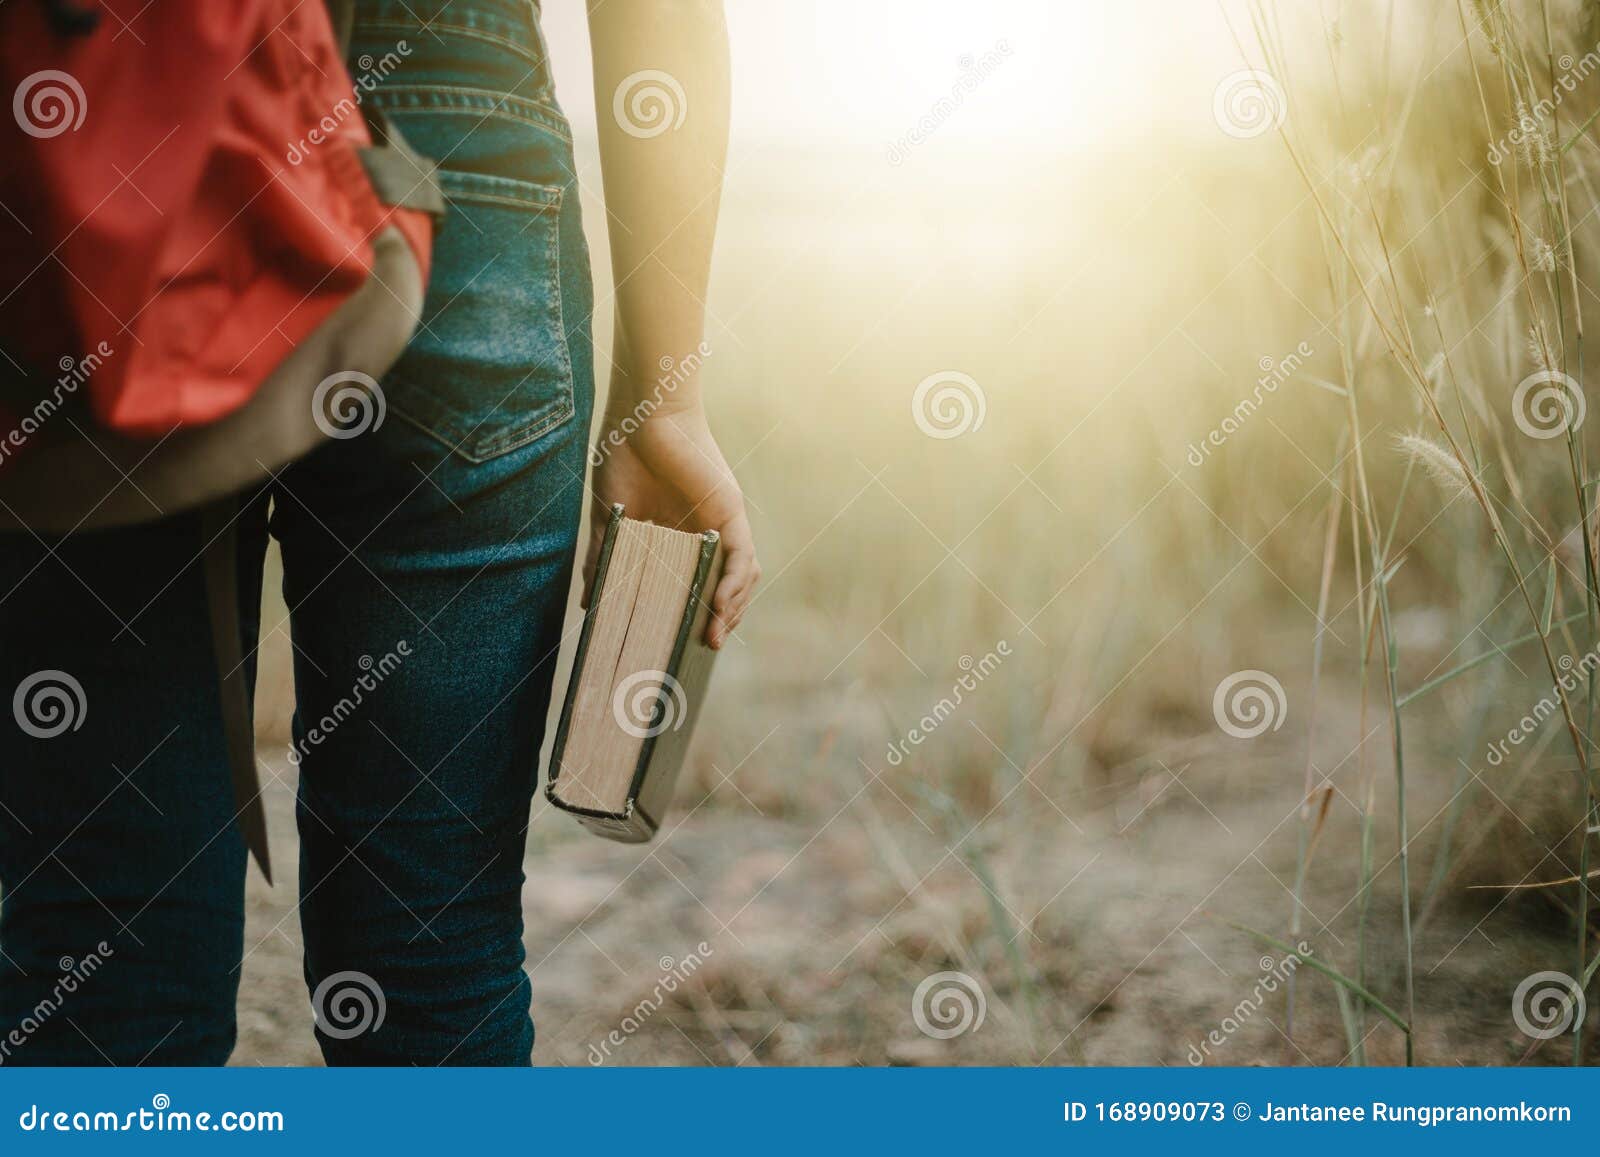 female backpackers standing and hold the bible.